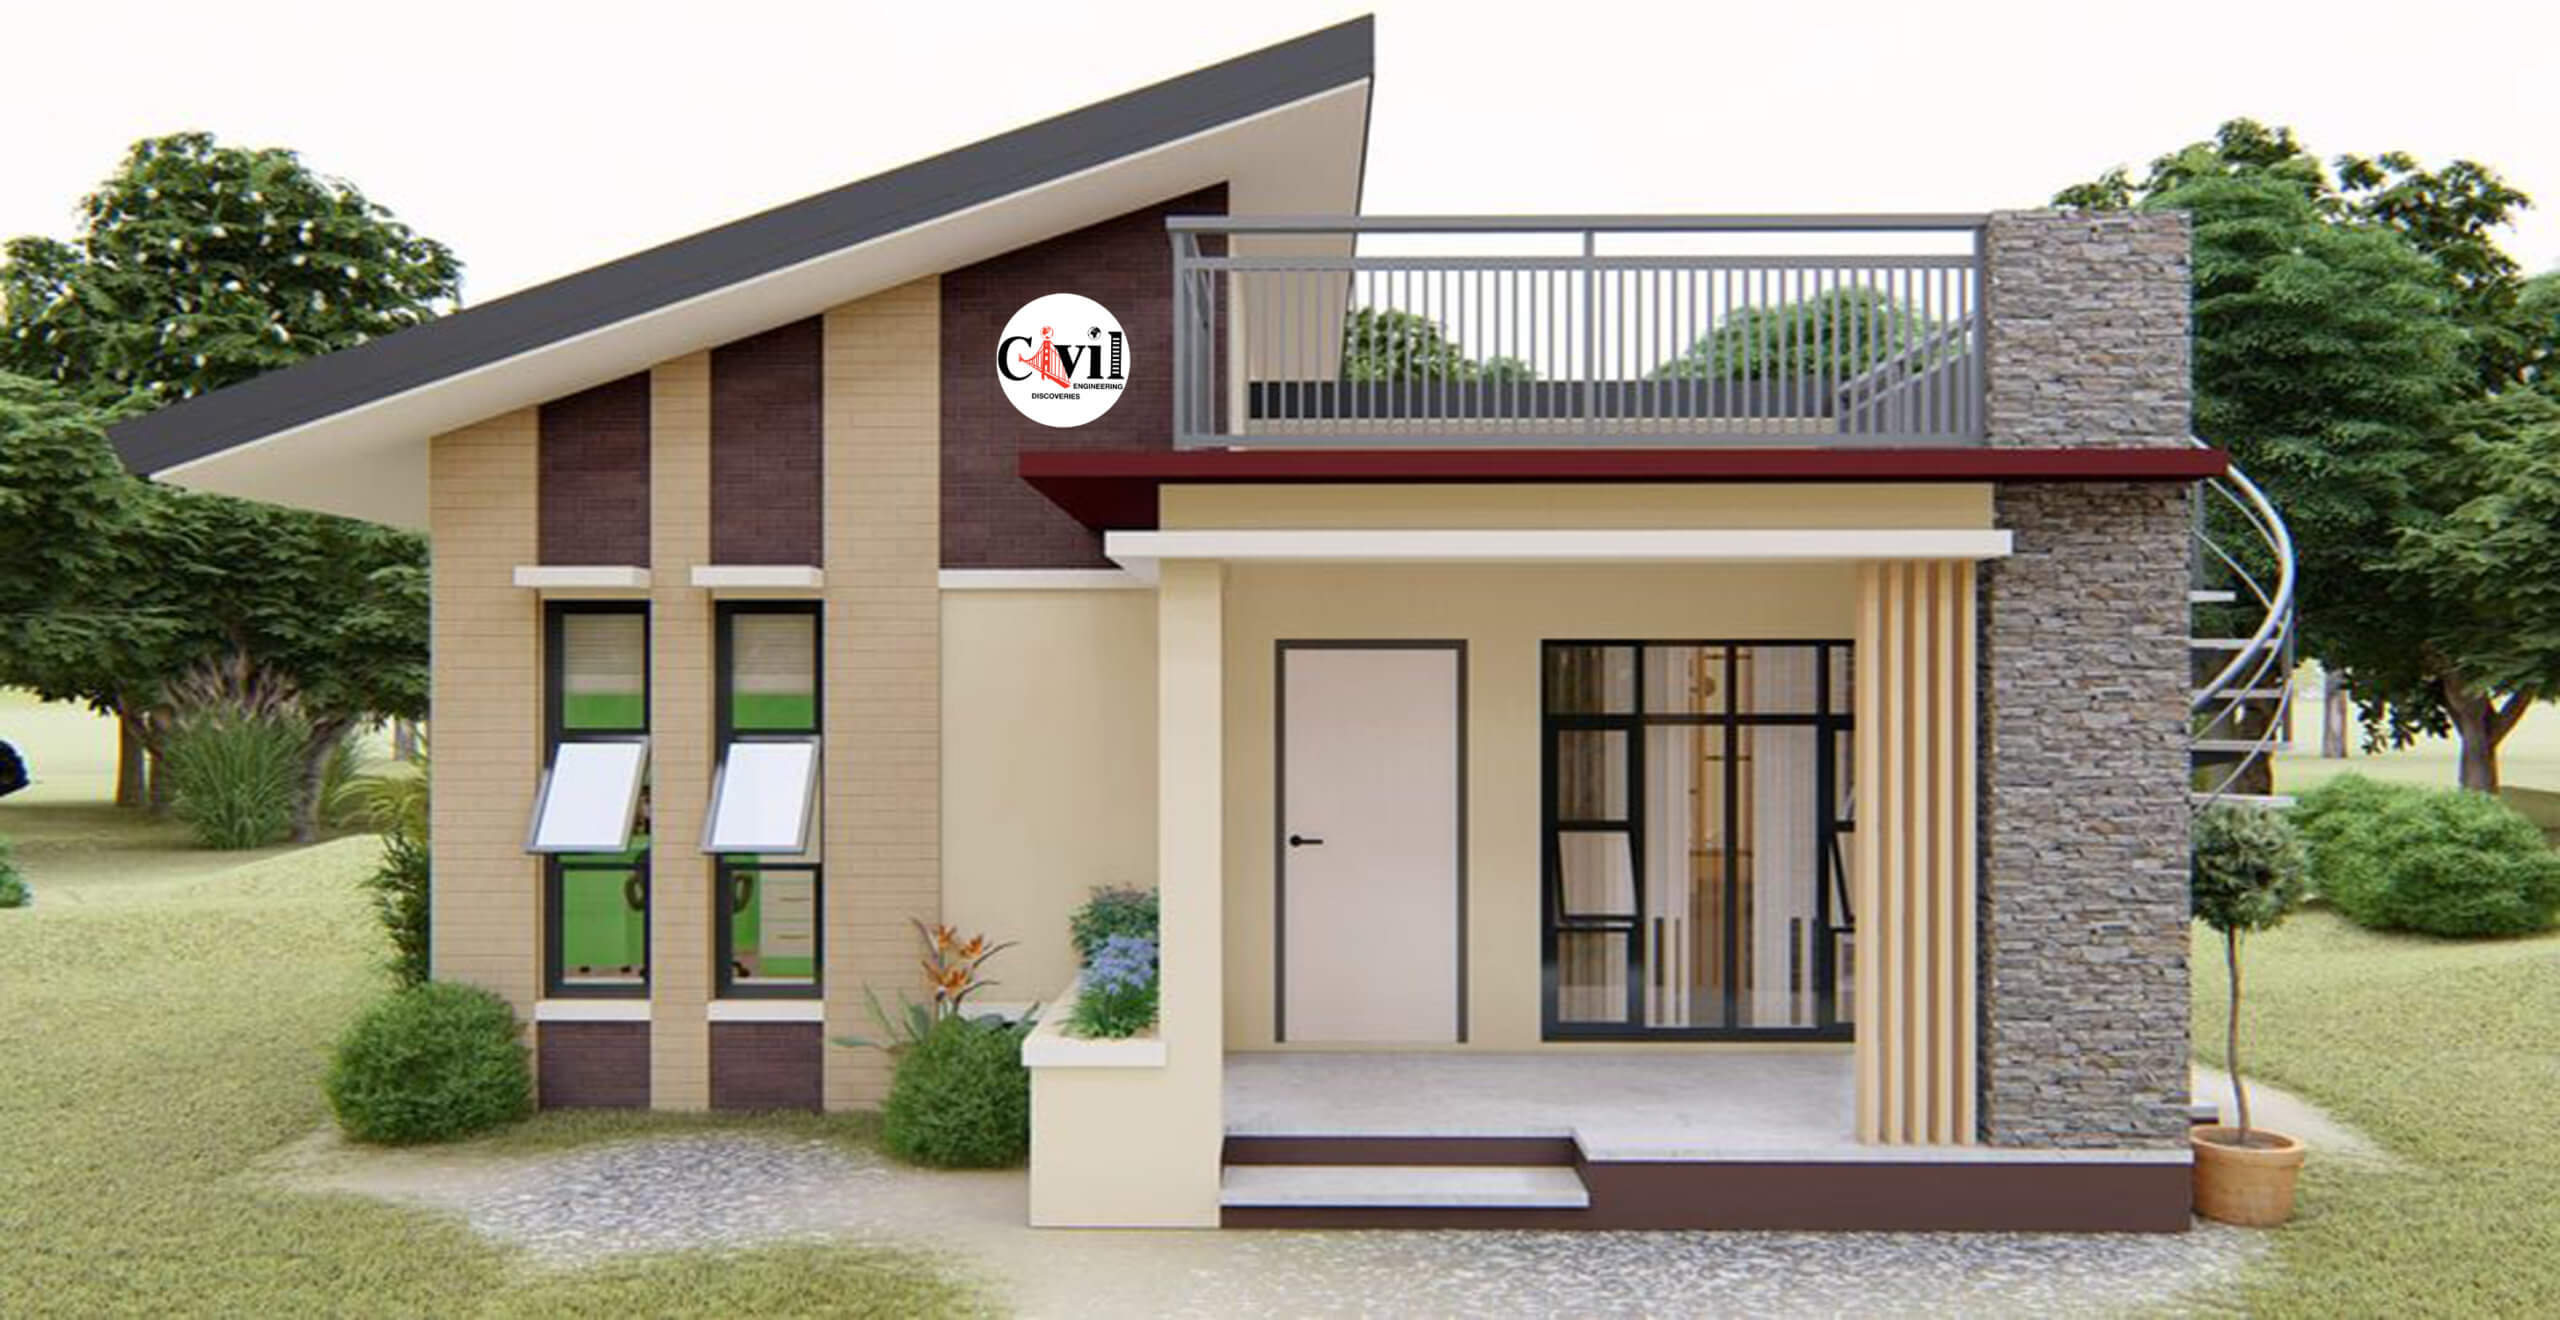 80 SQ.M. Modern Bungalow House Design With Roof Deck Engineering